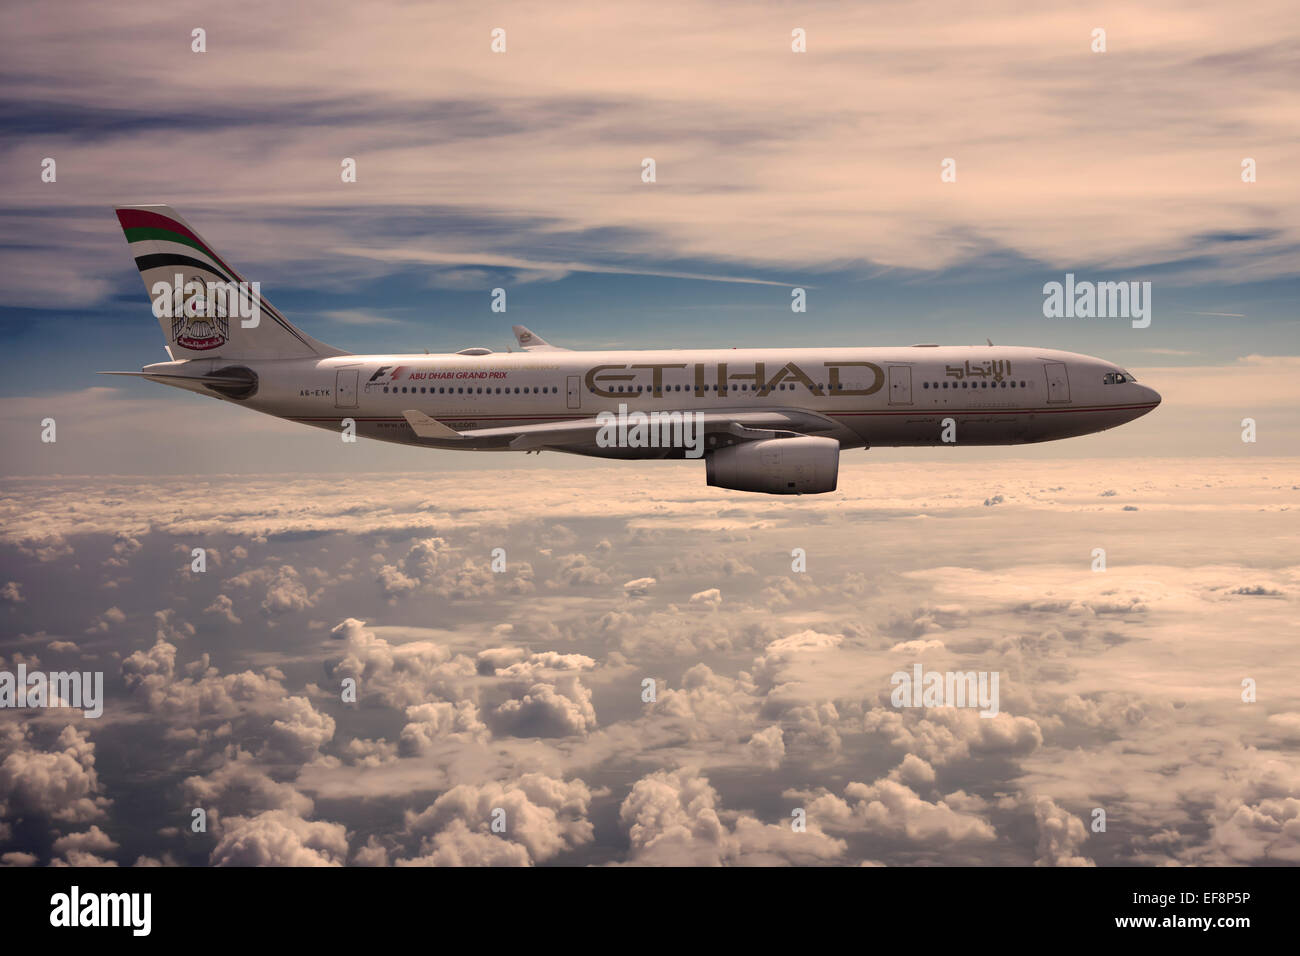 A6-EYK Etihad Airways Airbus A330-243 in flight above the clouds in the evening light Stock Photo